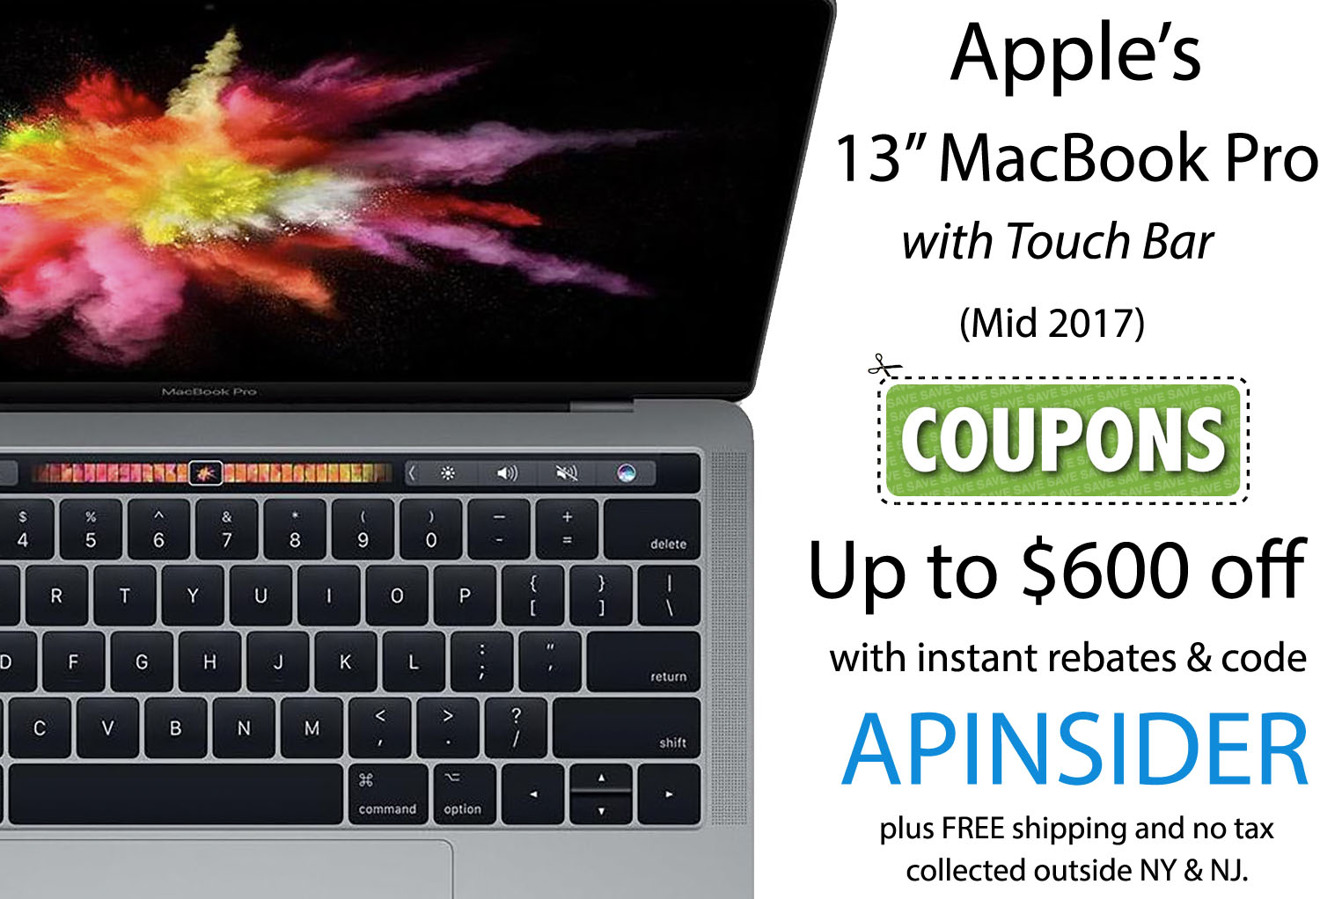 Apple Mid 2017 13 inch MacBook Pro with TouchBar and coupon graphic